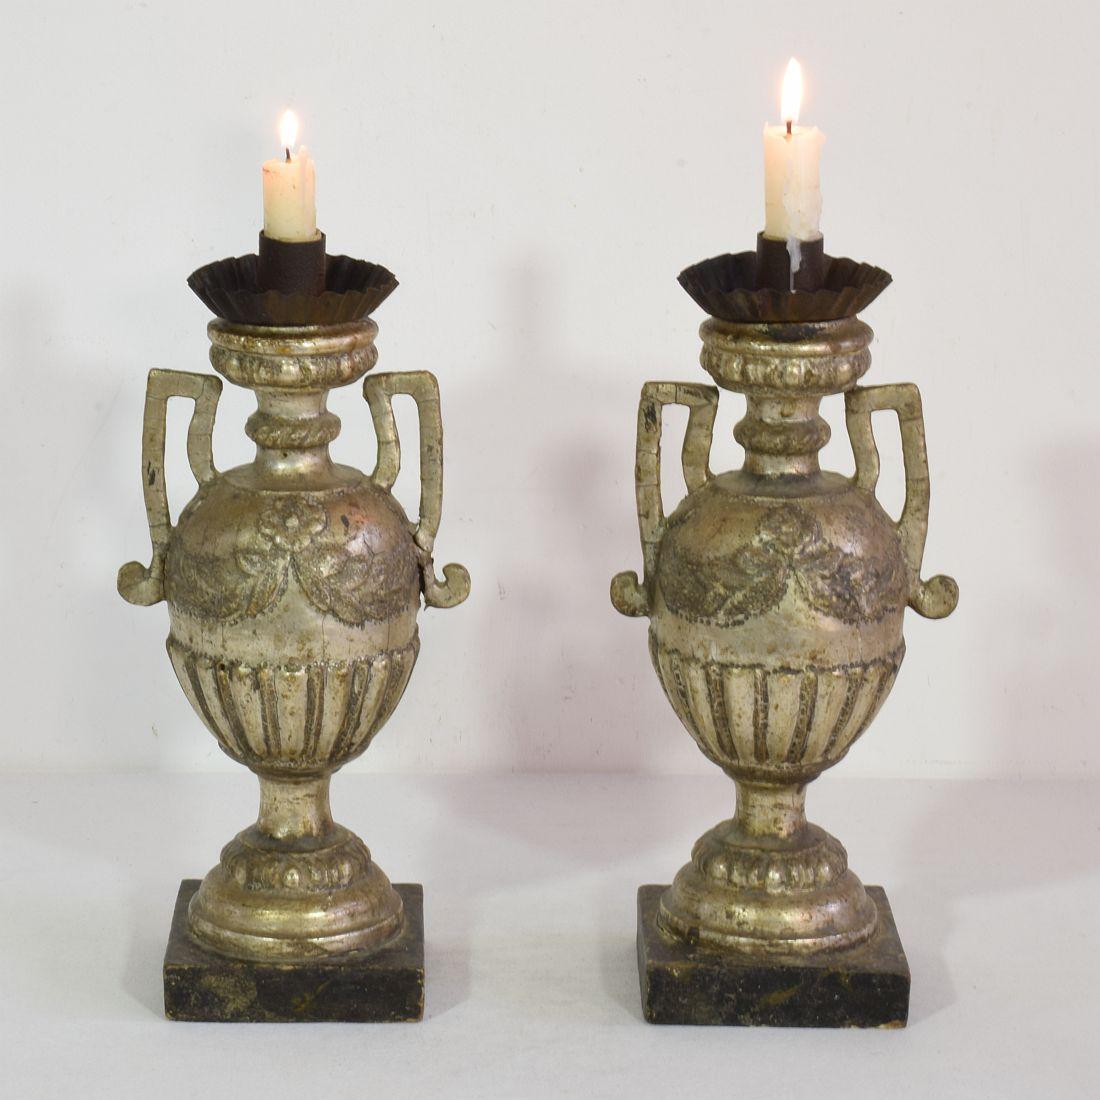 Great pair of neoclassical candleholders with their original silver.
They are made out of wood and iron.
Italy, circa 1770-1800.
Weathered and small losses.